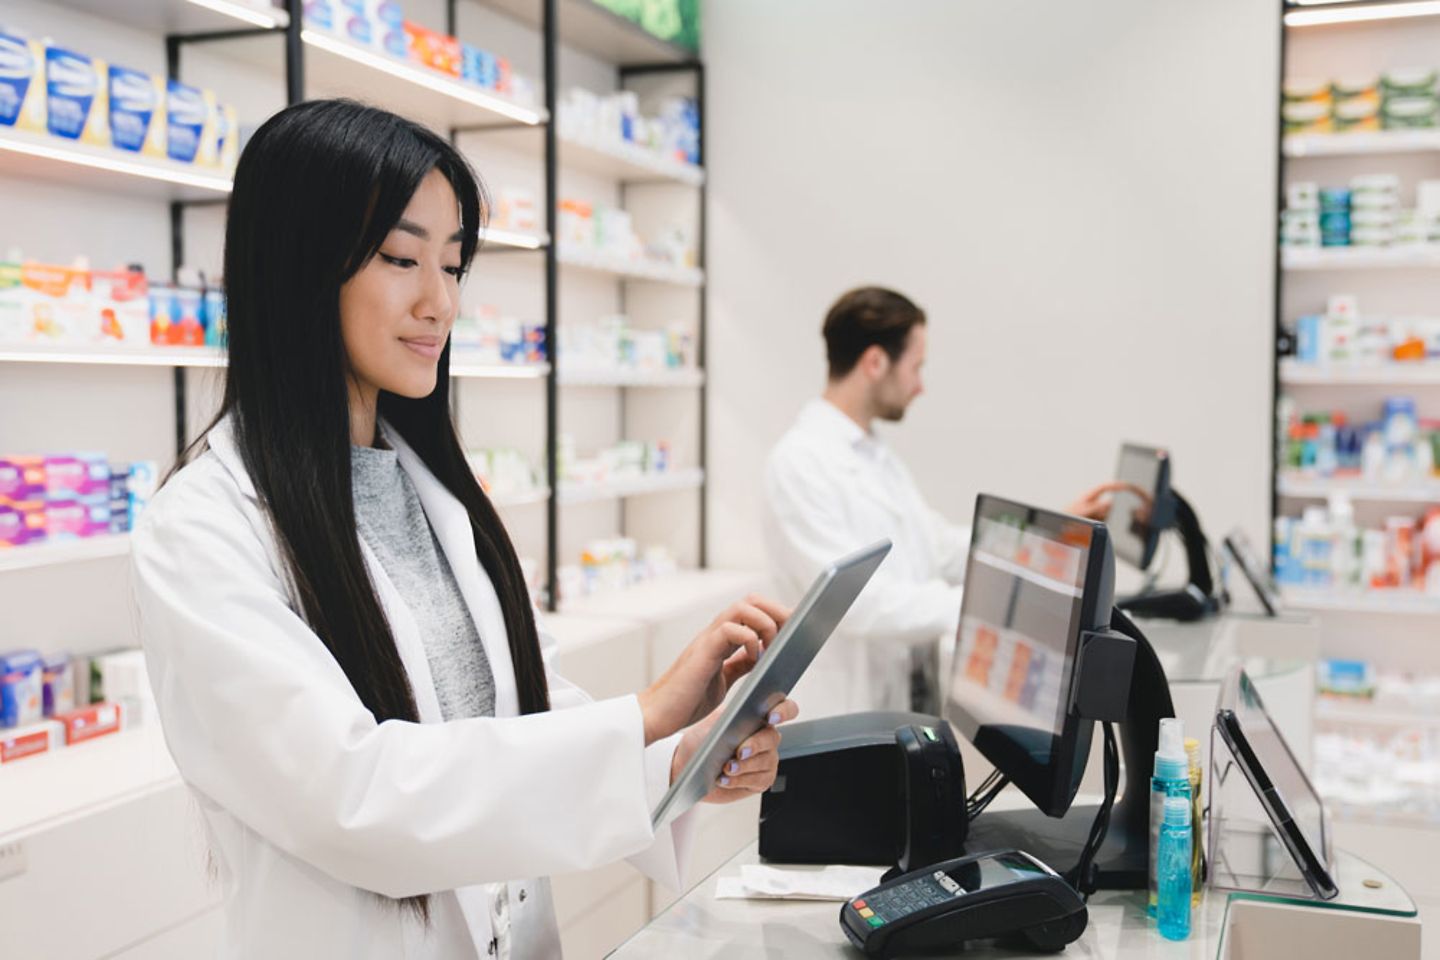 pharmacists selling medications standing at cash point desk in pharmacy drugstore